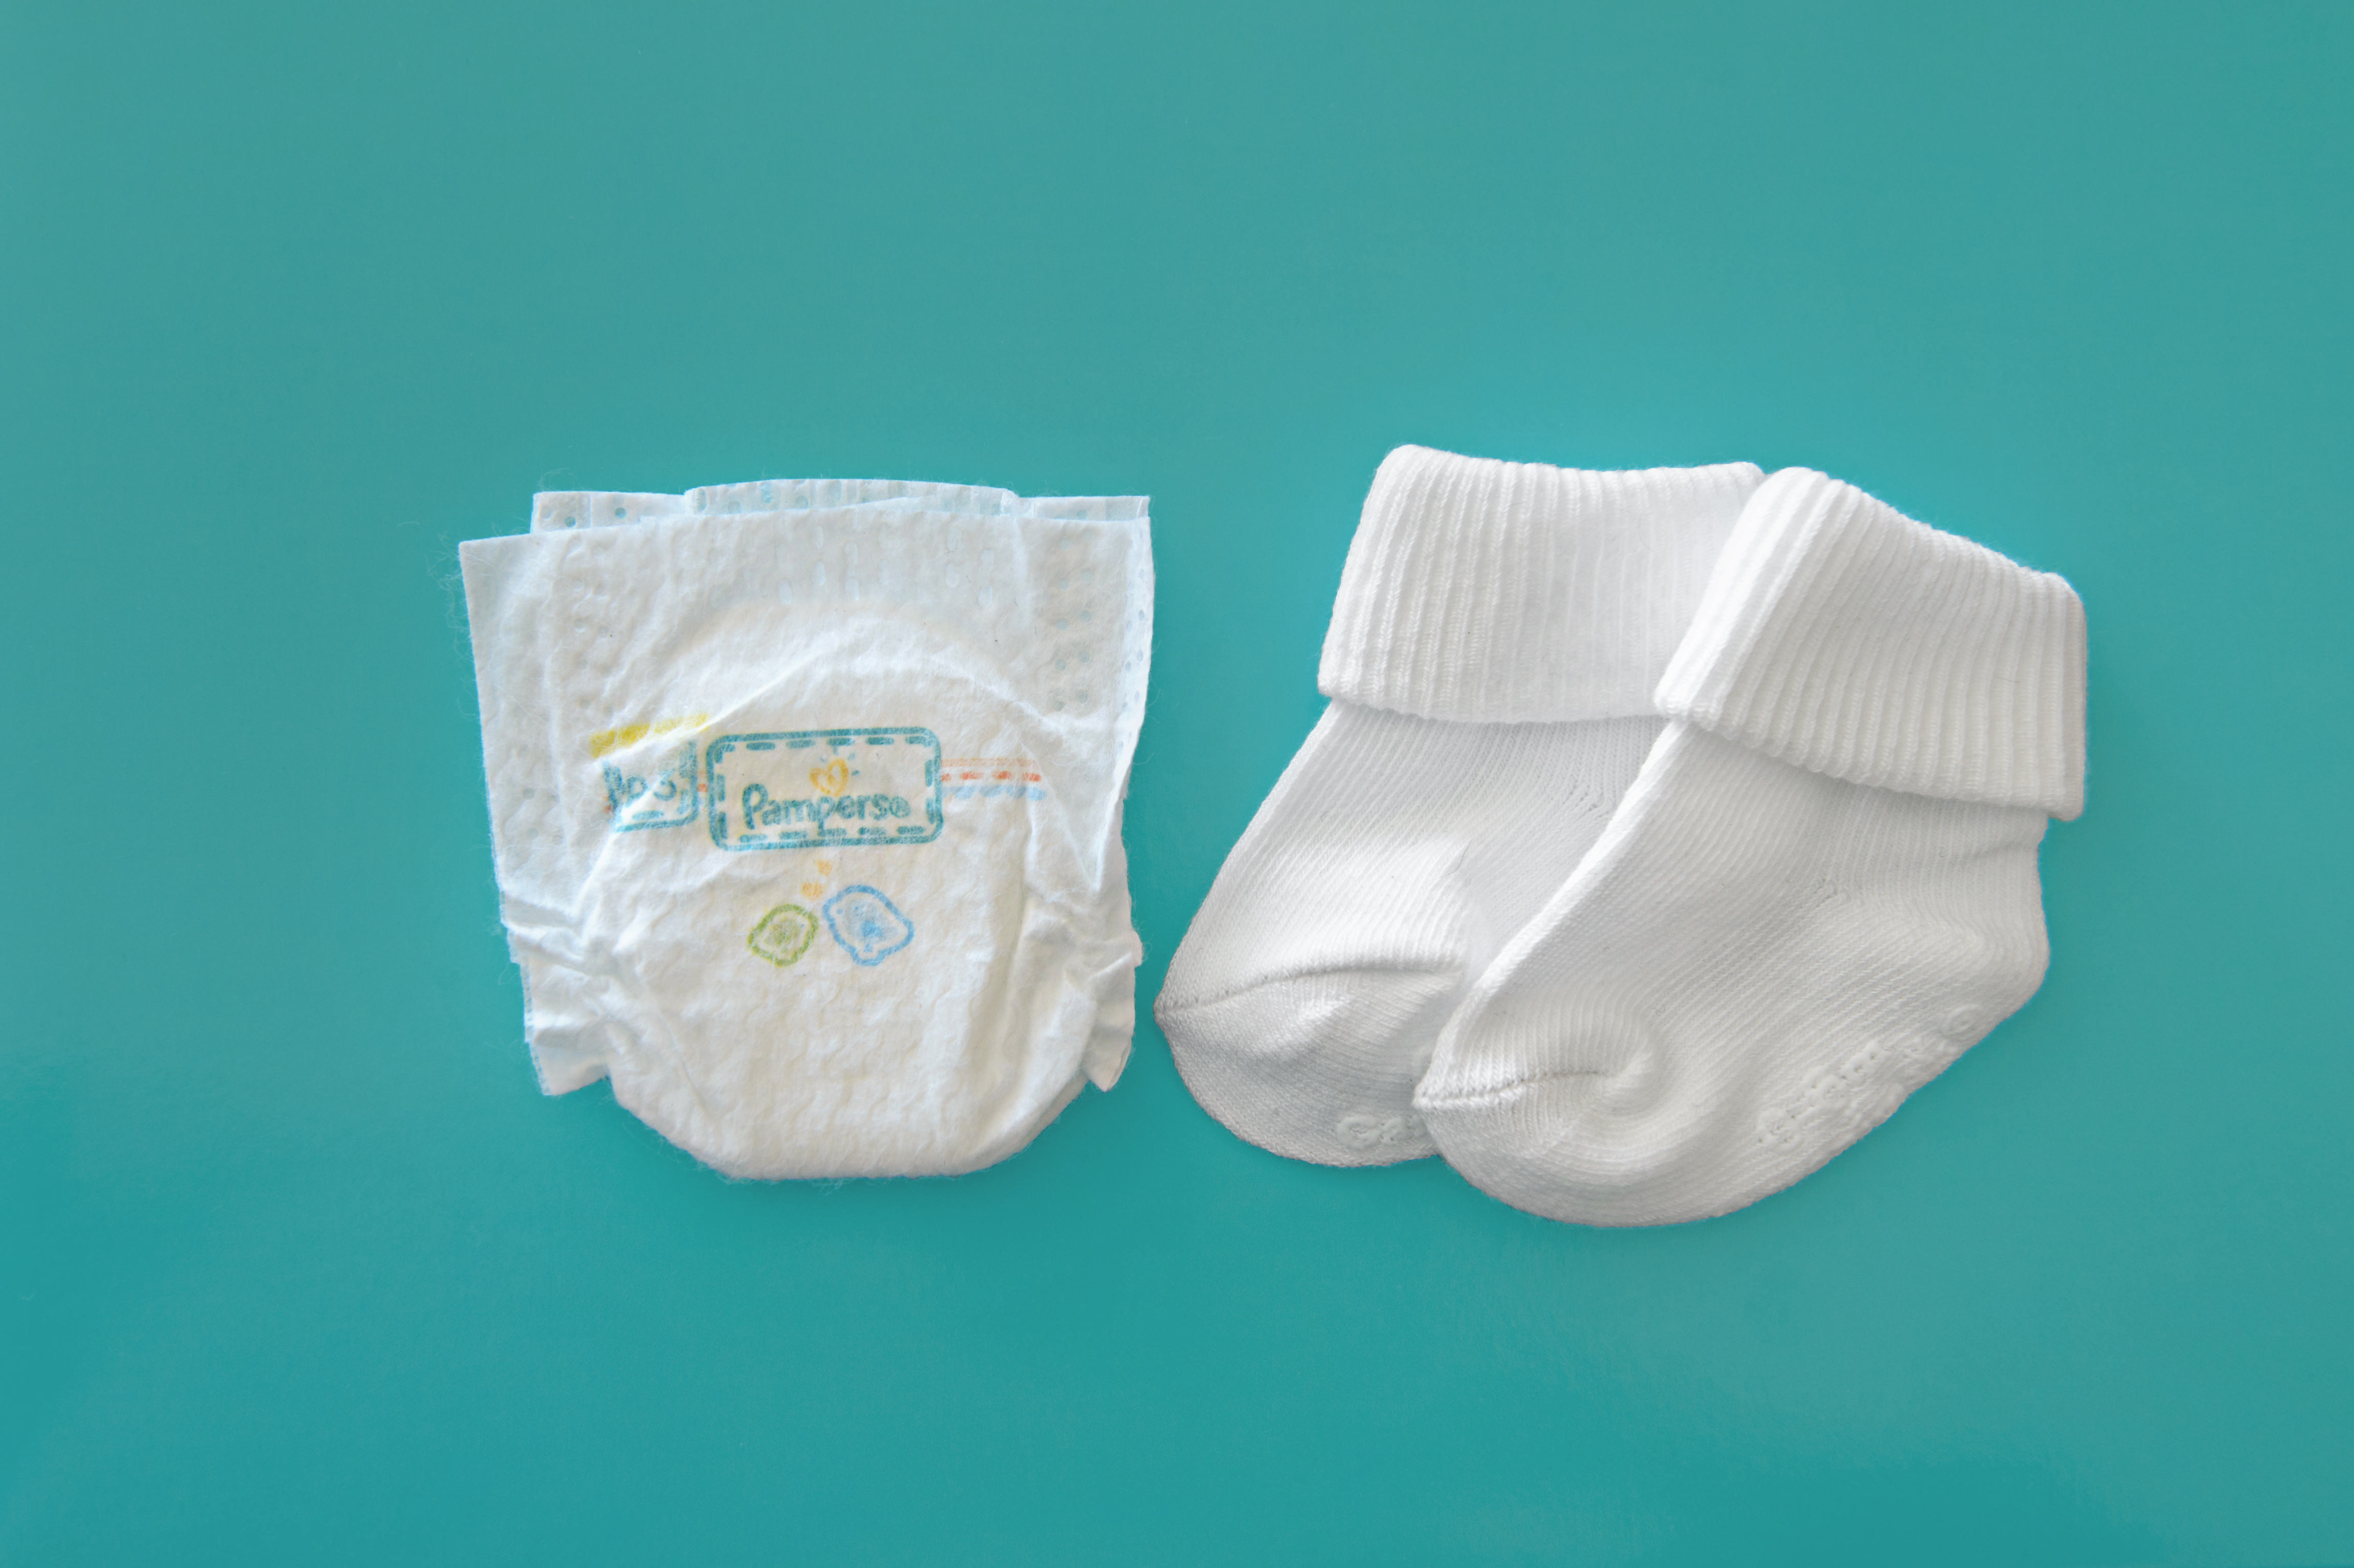 pampers p2 diapers